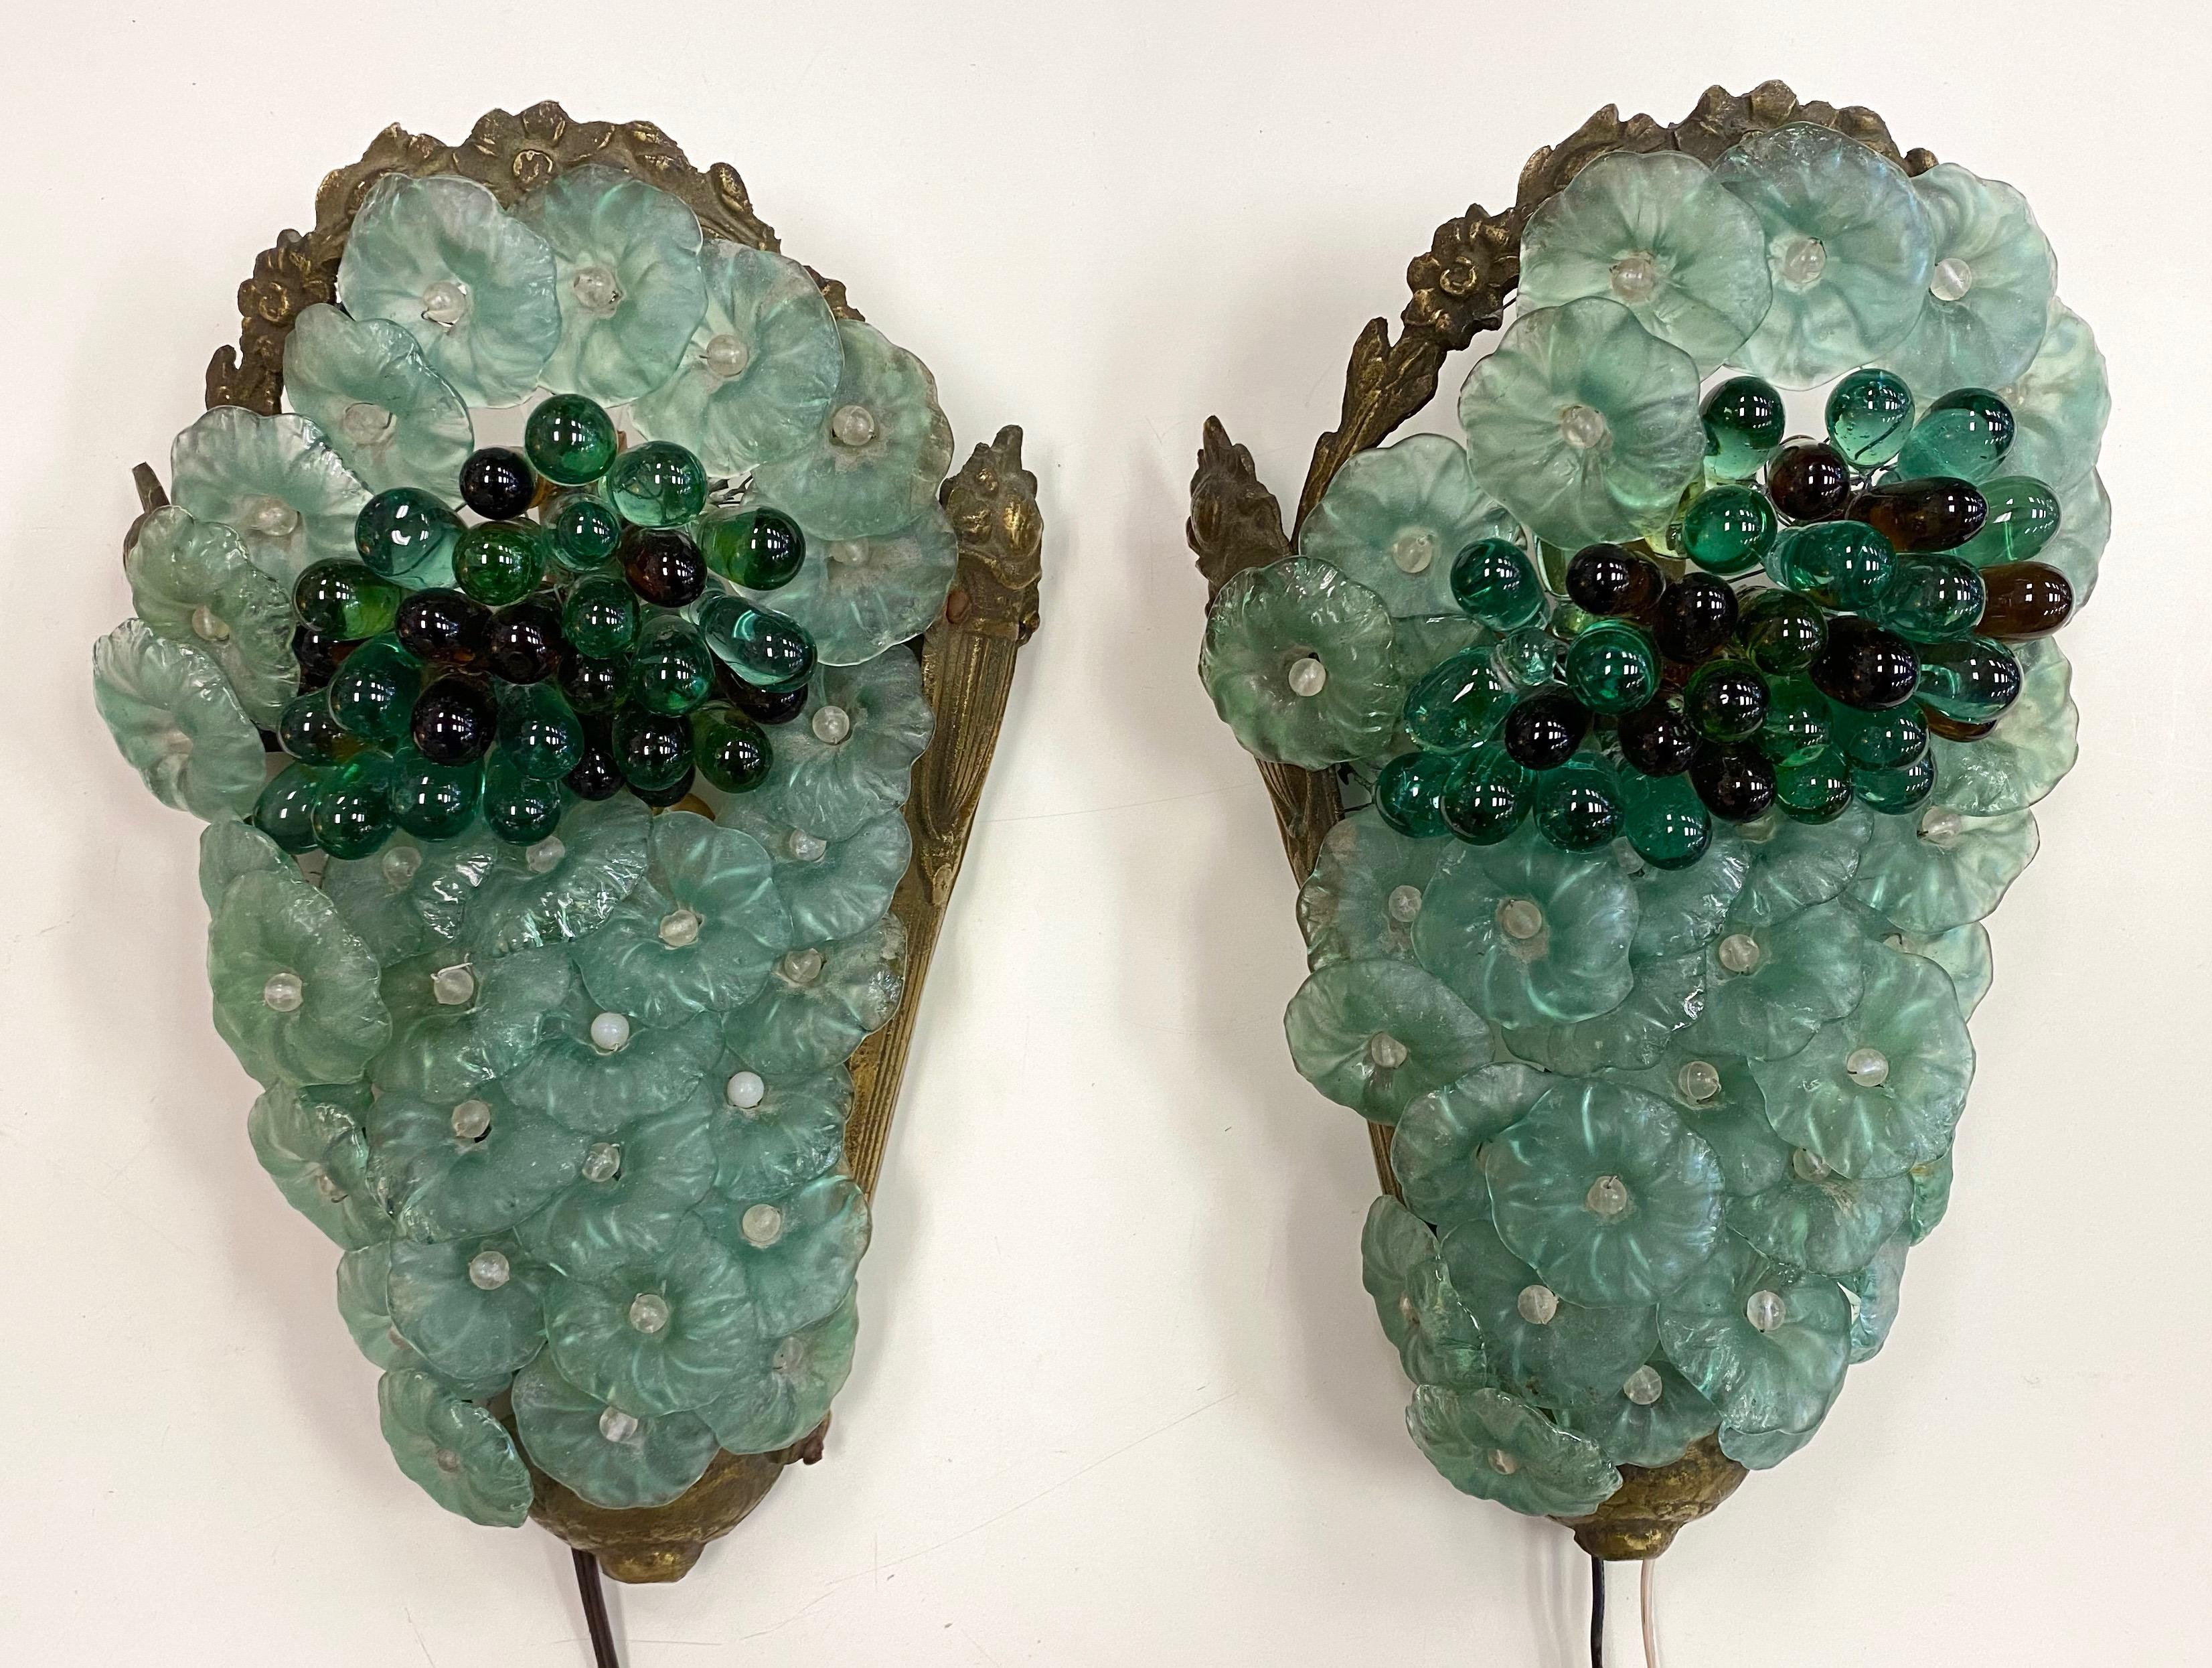 A beautiful pair of 1950s brass and Venetian or Murano glass floral and grape cluster lighted wall sconces.

Tight grouping of richly hued emerald green and dark amber glass grapes nestled within a dense field of overlapping mint greenish-blue